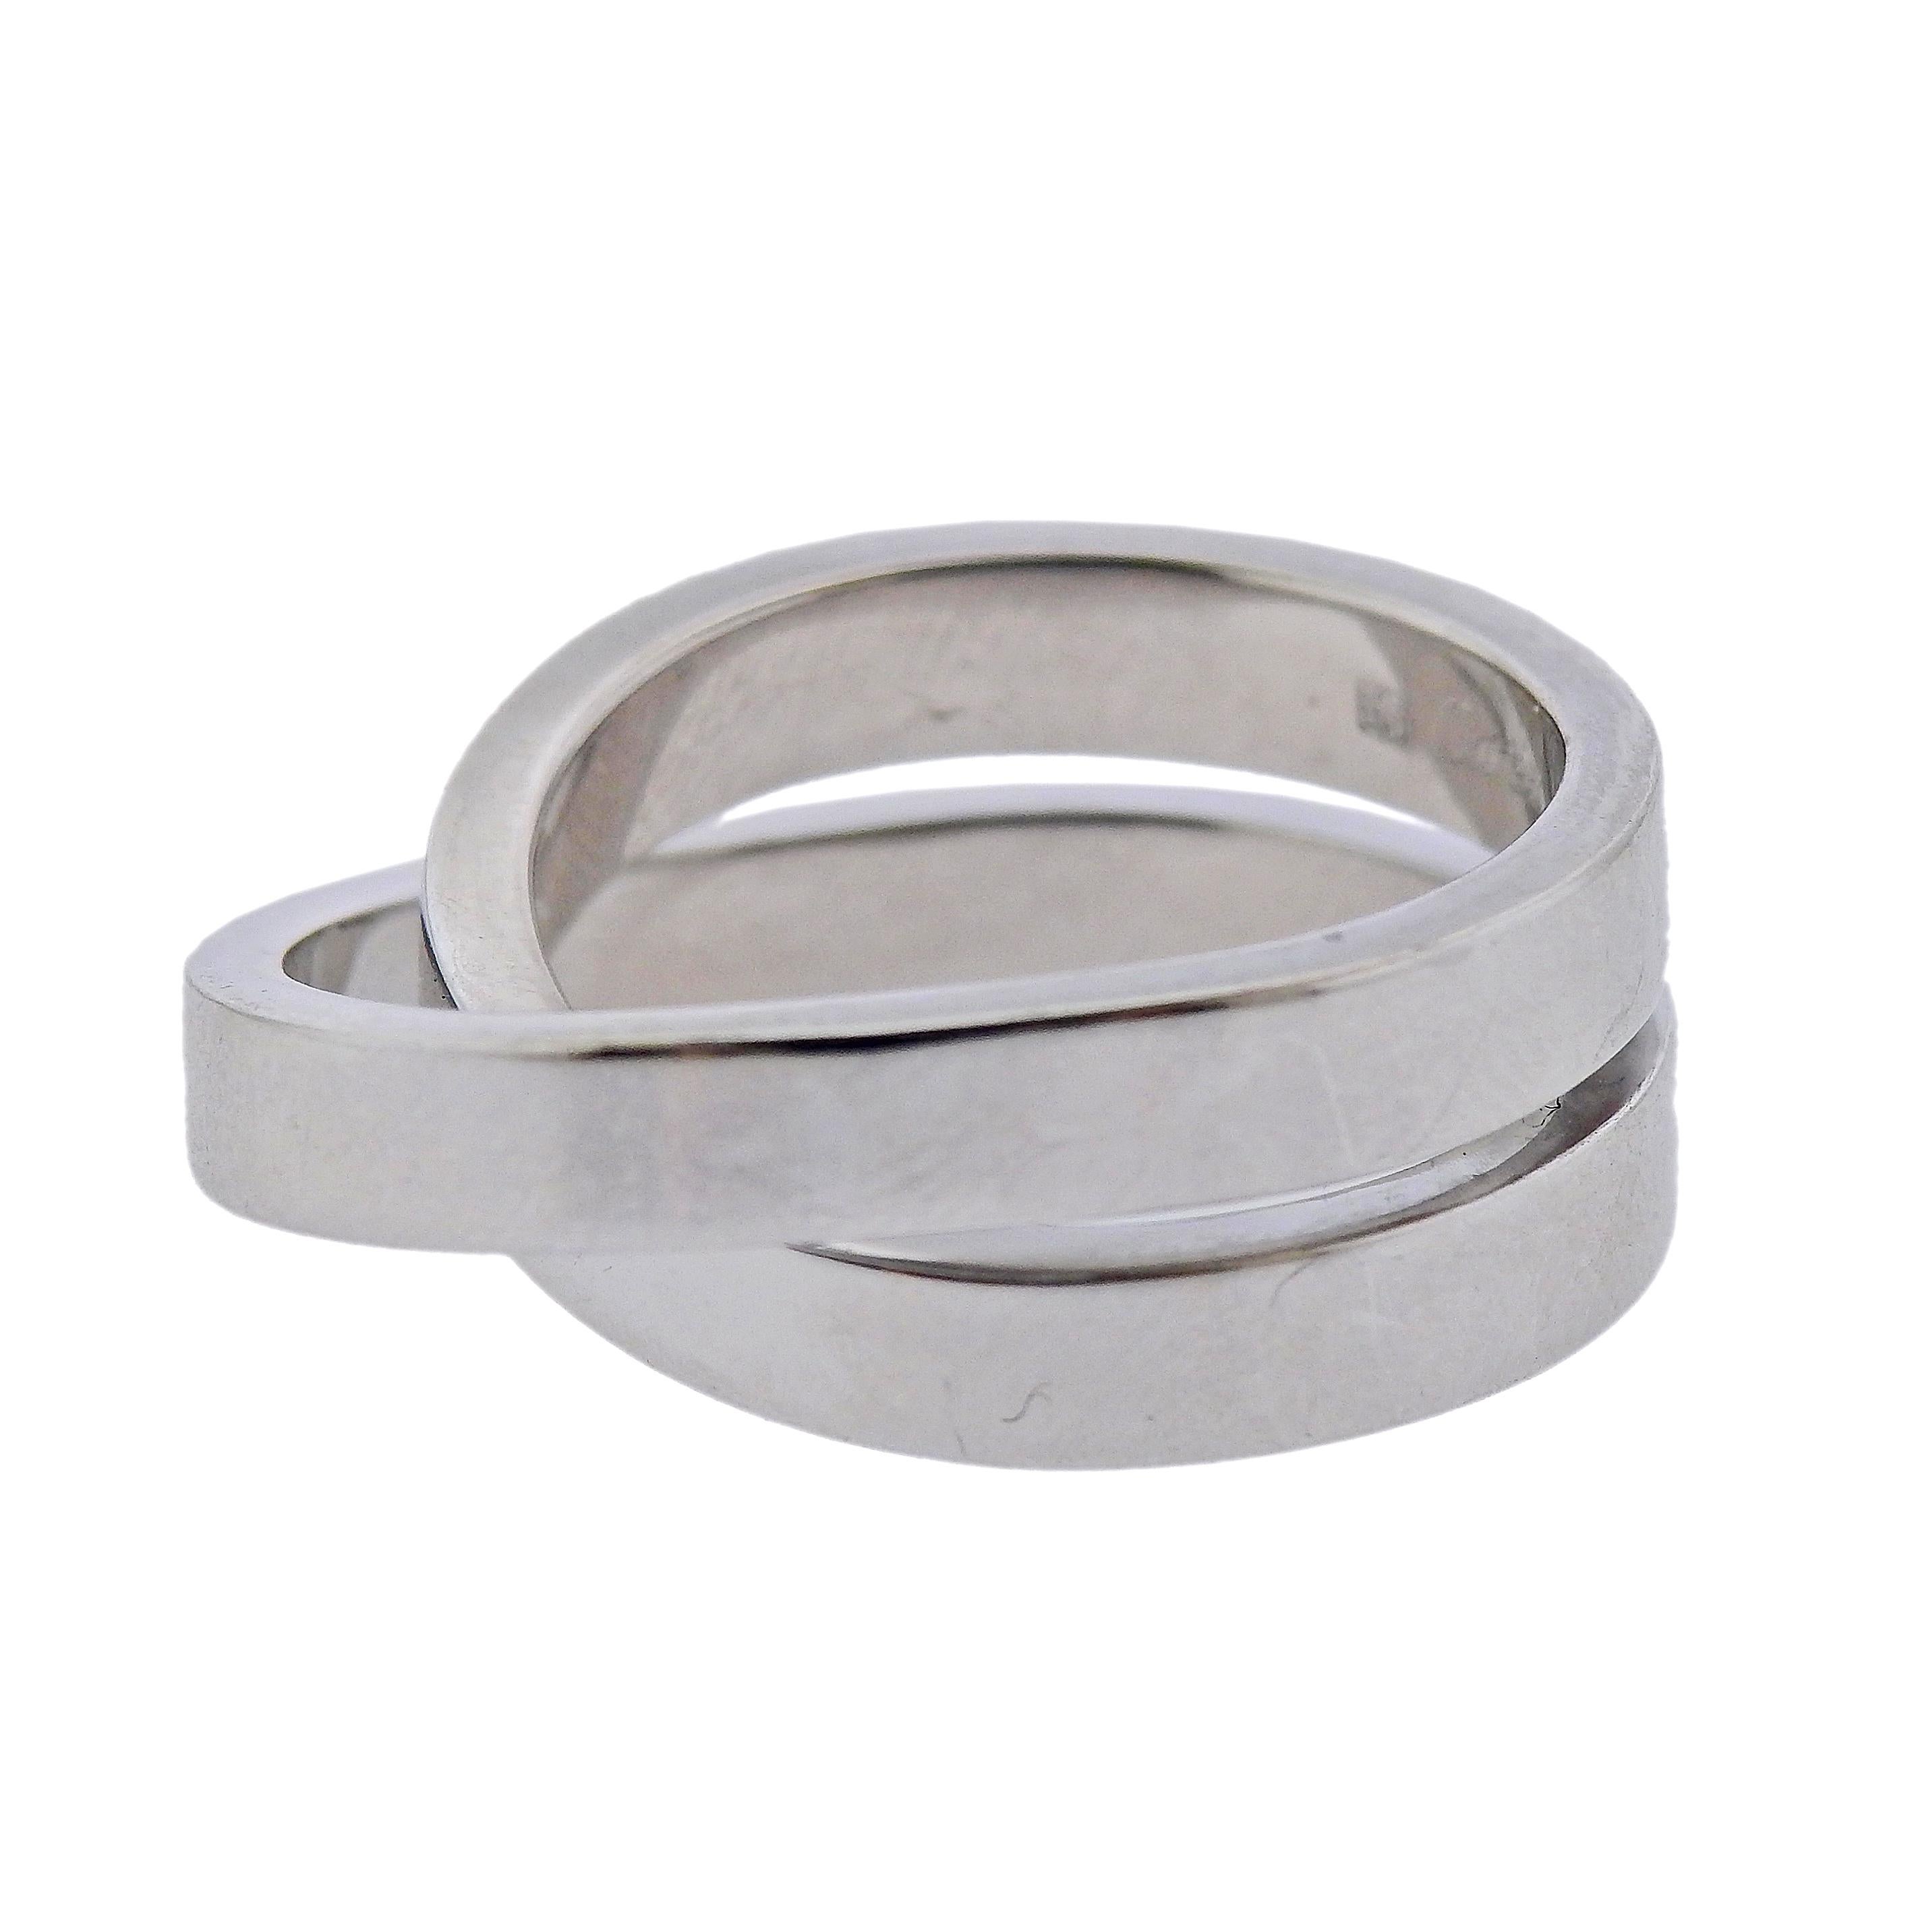 18k white gold Cartier Nouvelle Vague ring. Size 7.5, ring top is 9mm wide. Marked: Cartier, 1999, 750, H 90244. Weight - 16.1 grams. 